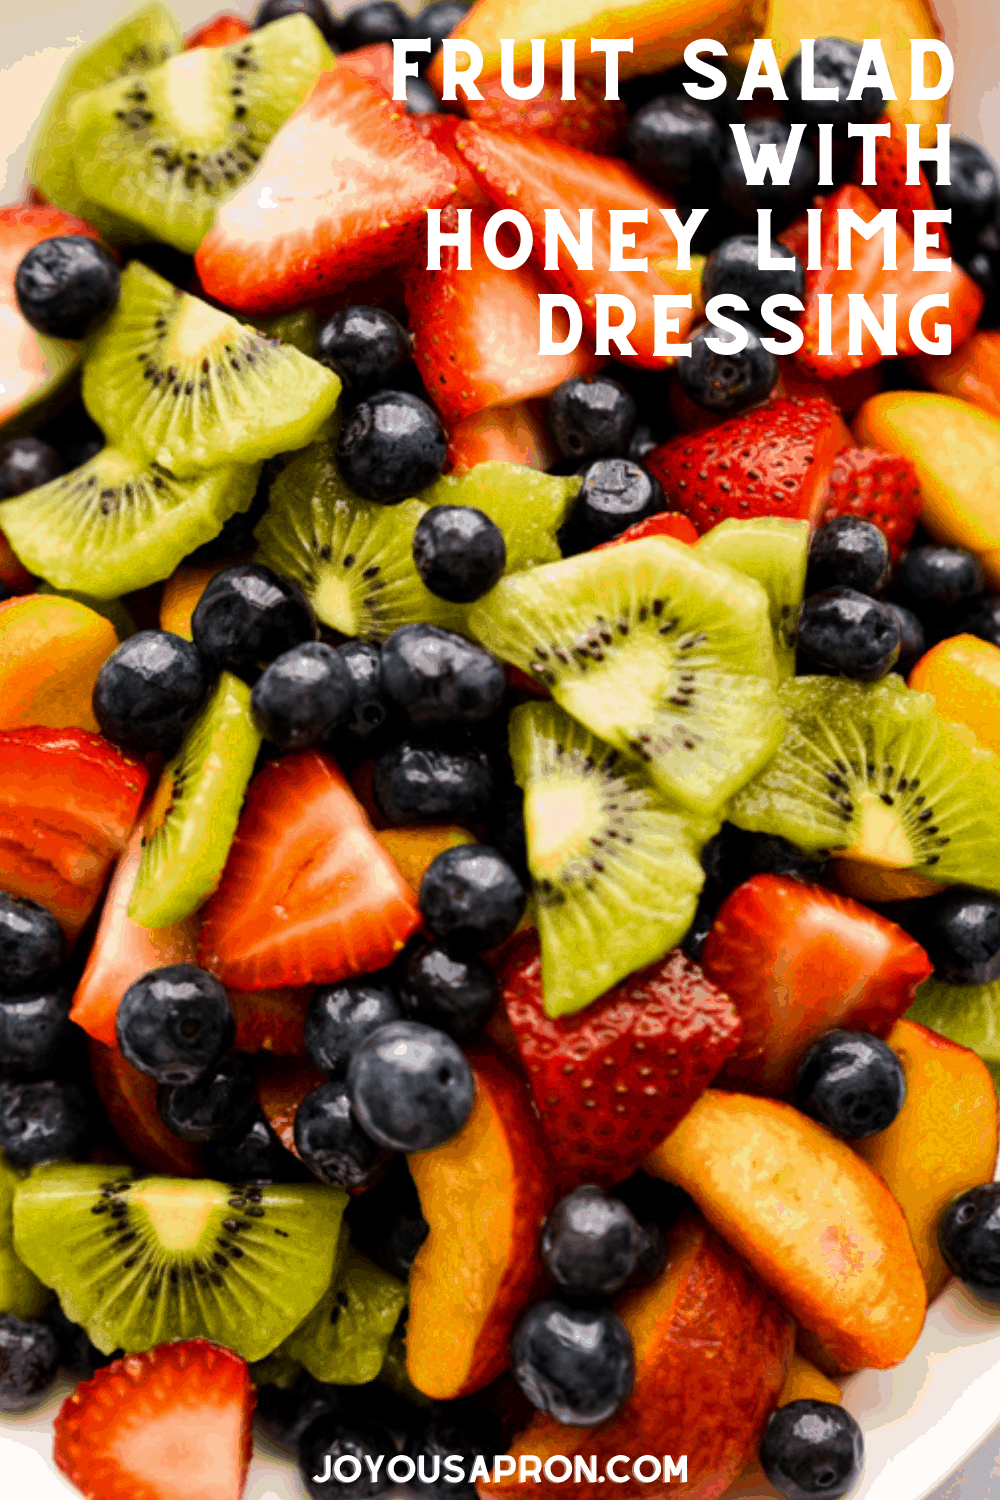 Fruit Salad with Honey Lime Dressing - summer fruits drizzled with a sweet and tangy honey lime dressing. Refreshing, delicious and full of great fruity flavors! An easy side for any meals, potlucks and parties. via @joyousapron